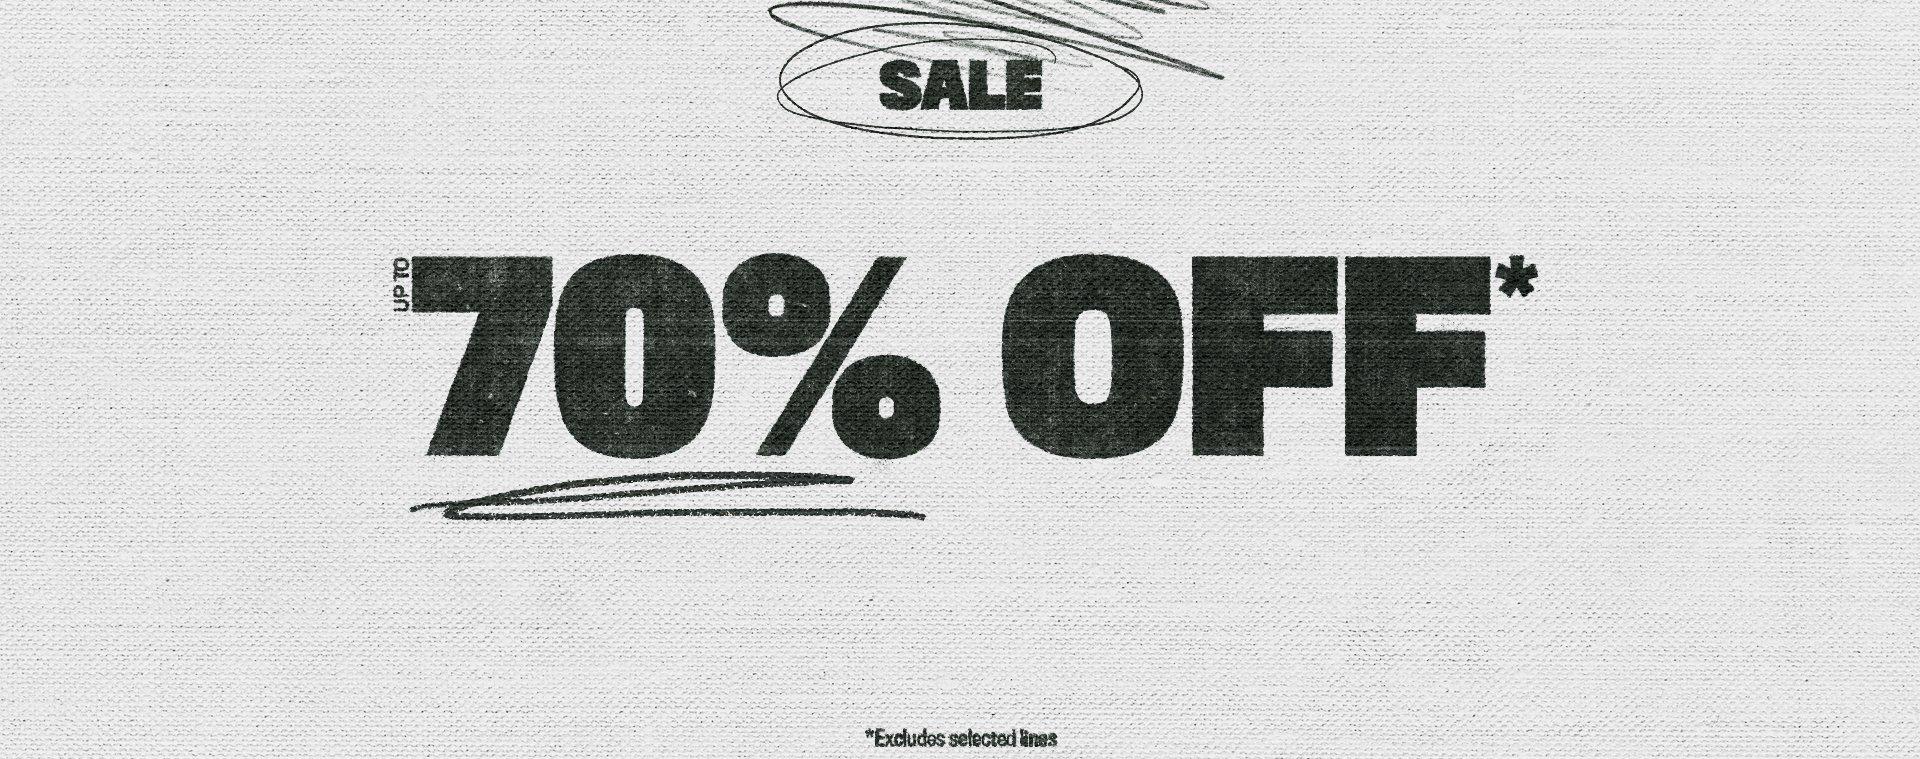 SALE UP TO 70% OFF!